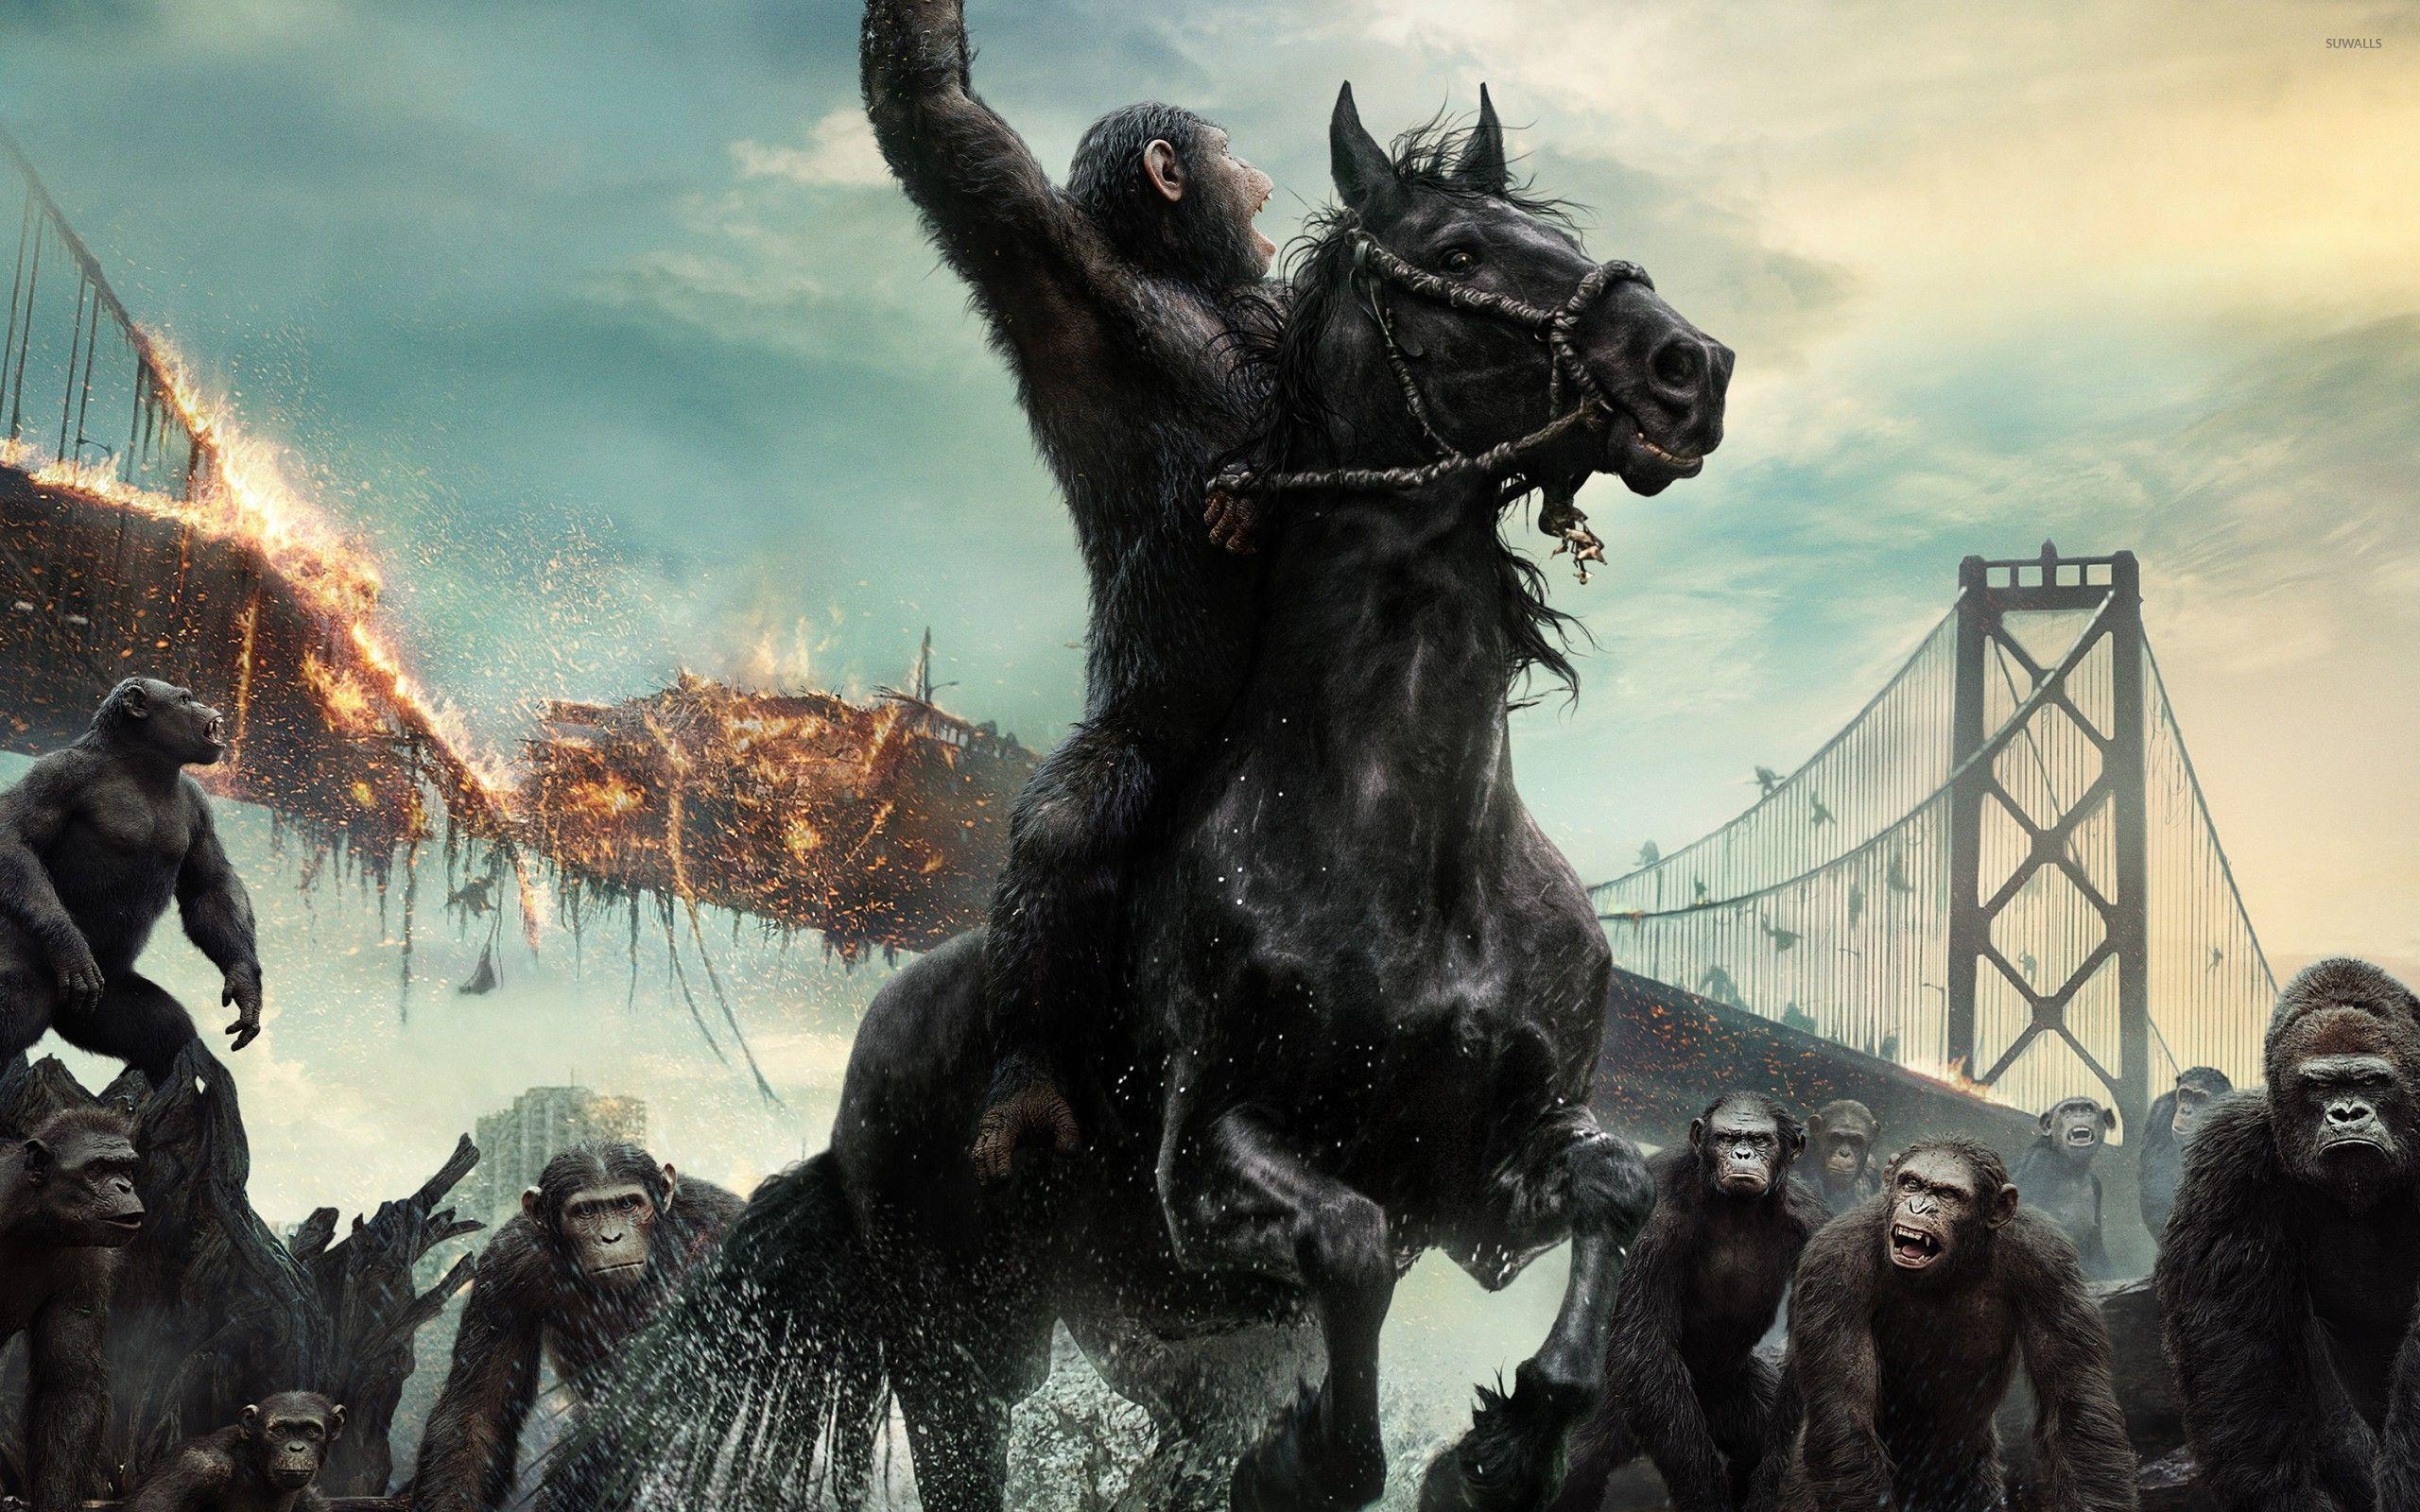 Caesar in Dawn of the Planet of the Apes wallpaper